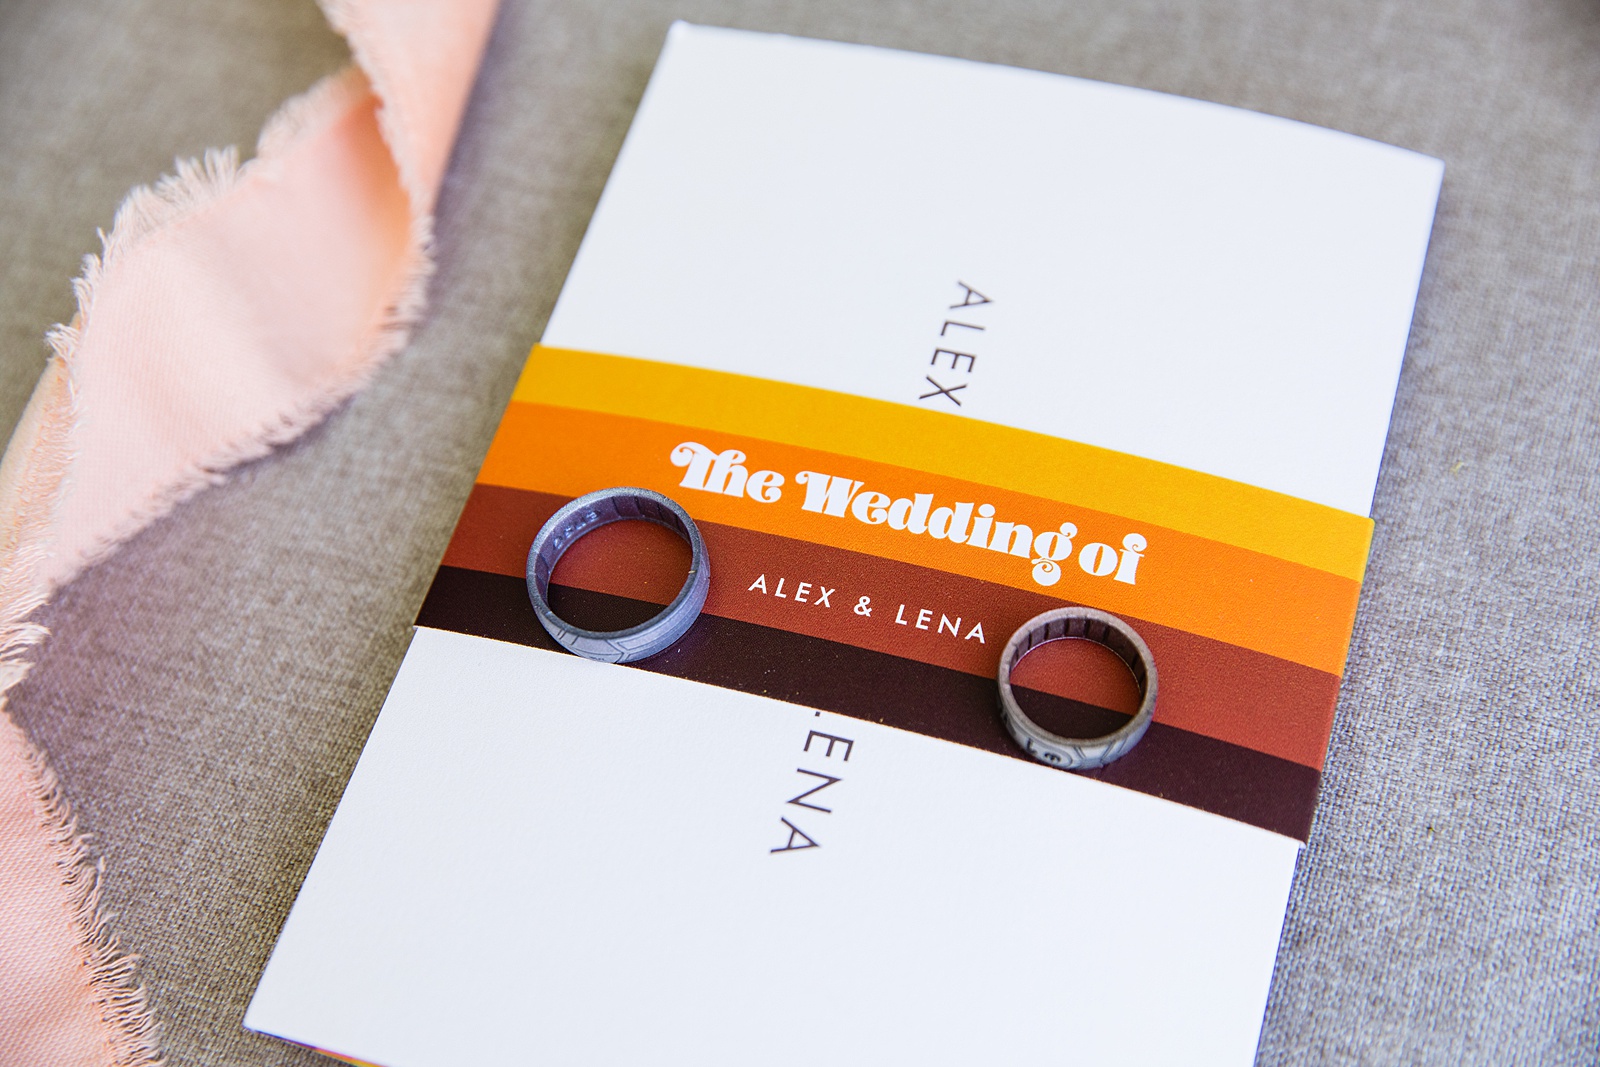 Bride's wedding day details of midmod invitation and wedding bands by PMA Photography.